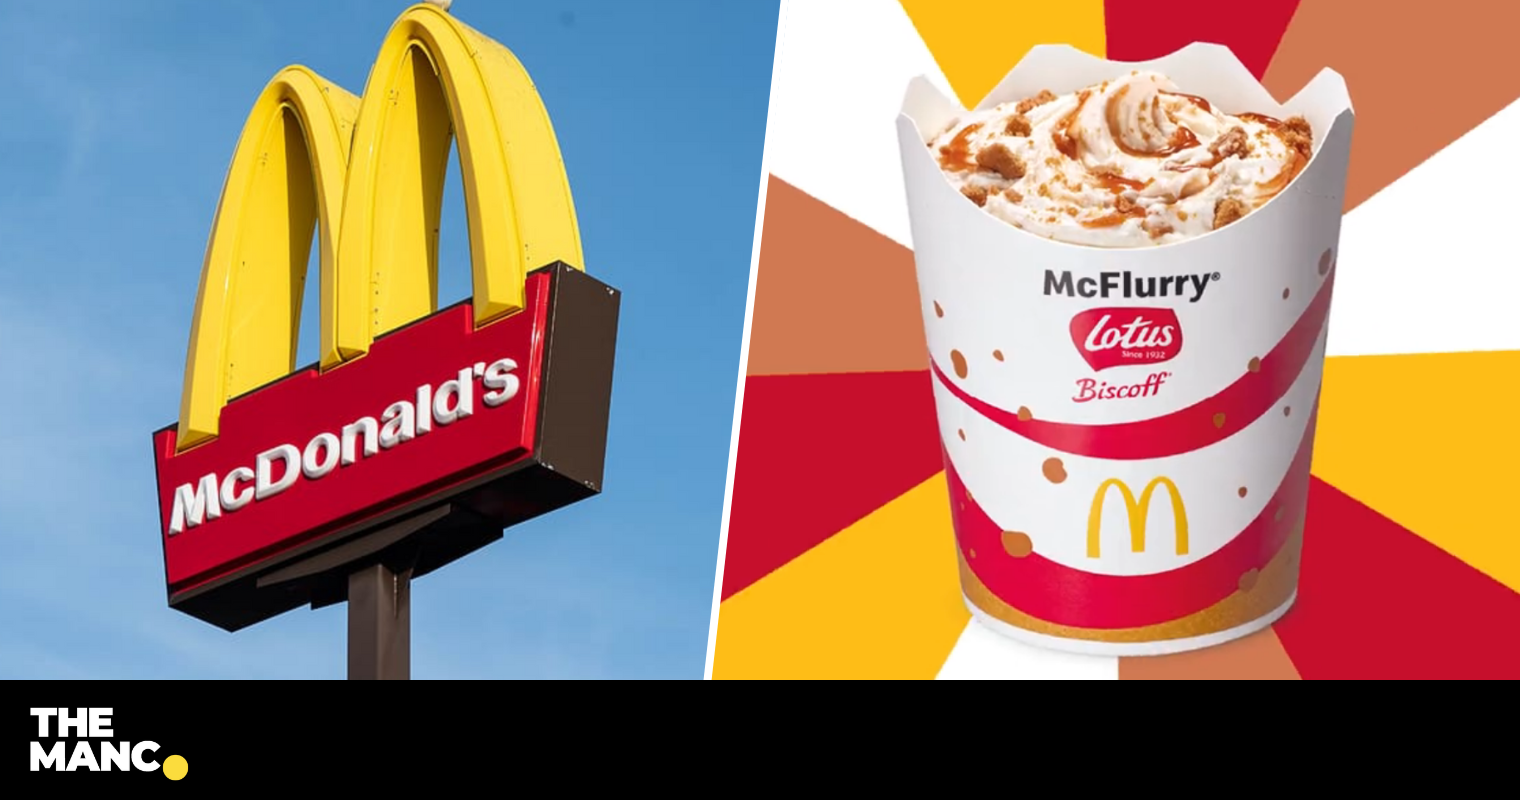 Mcdonalds Confirms The Lotus Biscoff Mcflurry Is Finally Launching In The Uk Next Week 0748